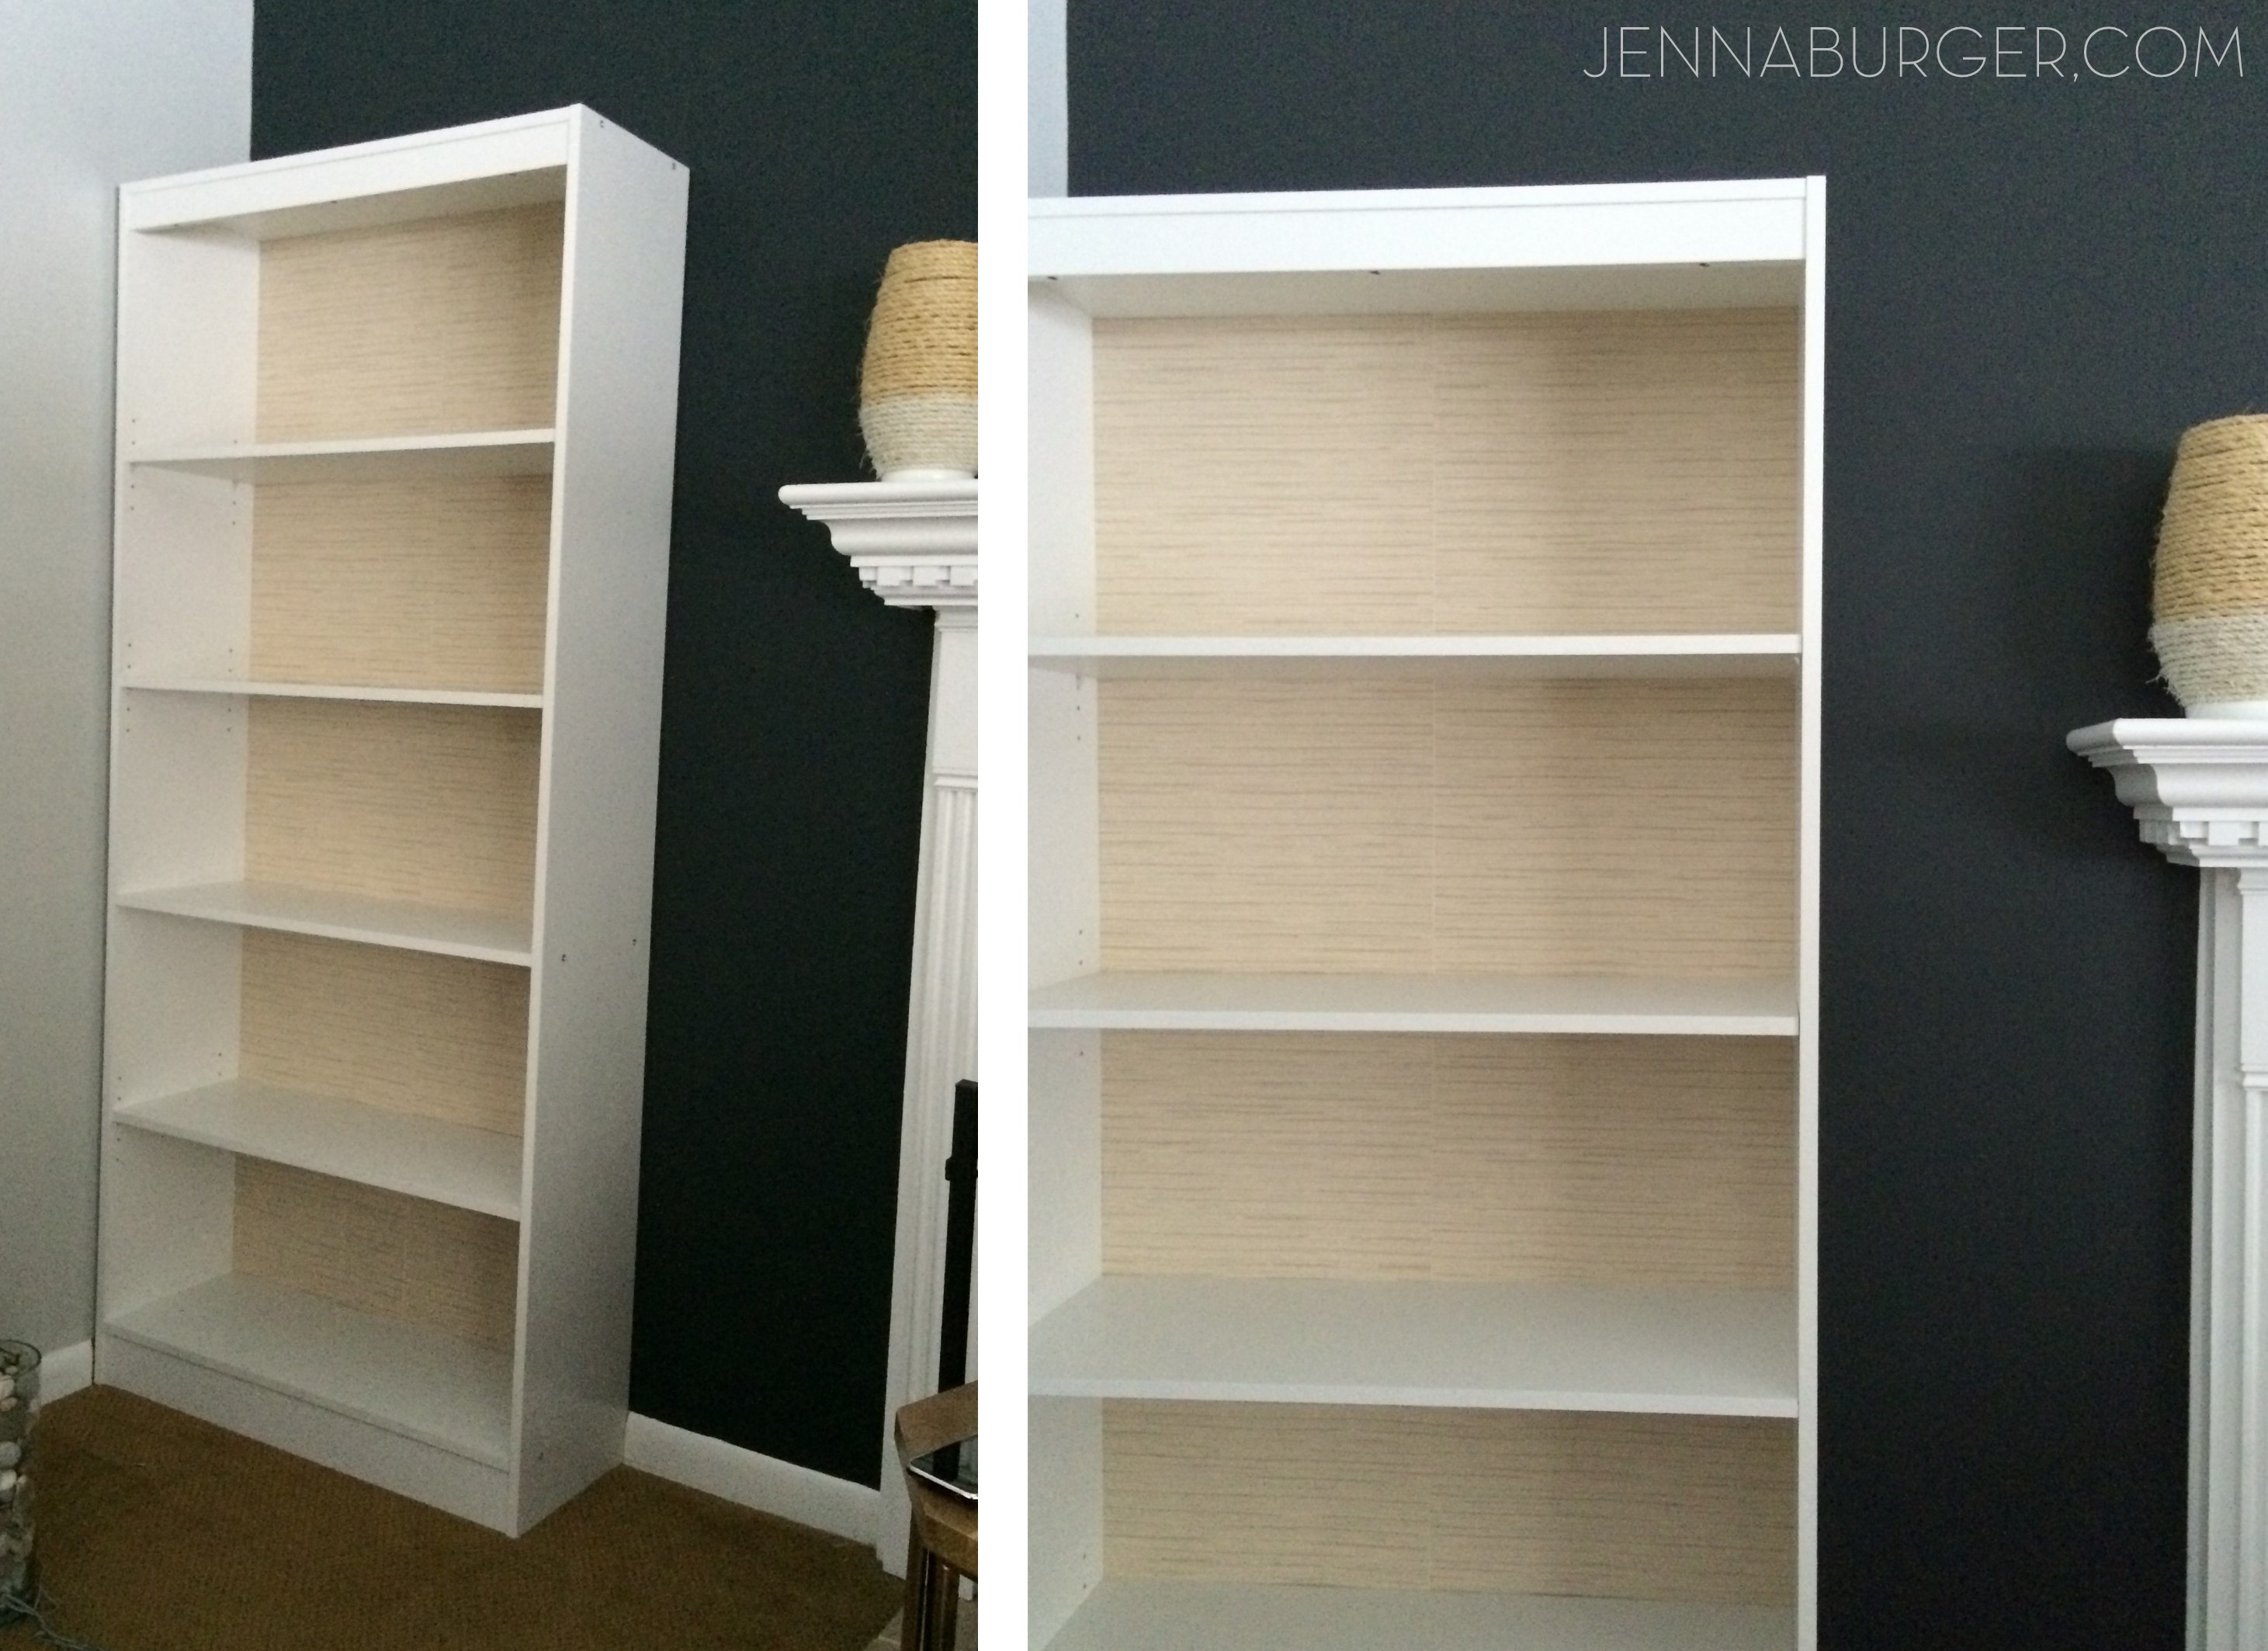 How To Make A Laminate Bookcase Look Like A Built In Bookshelf